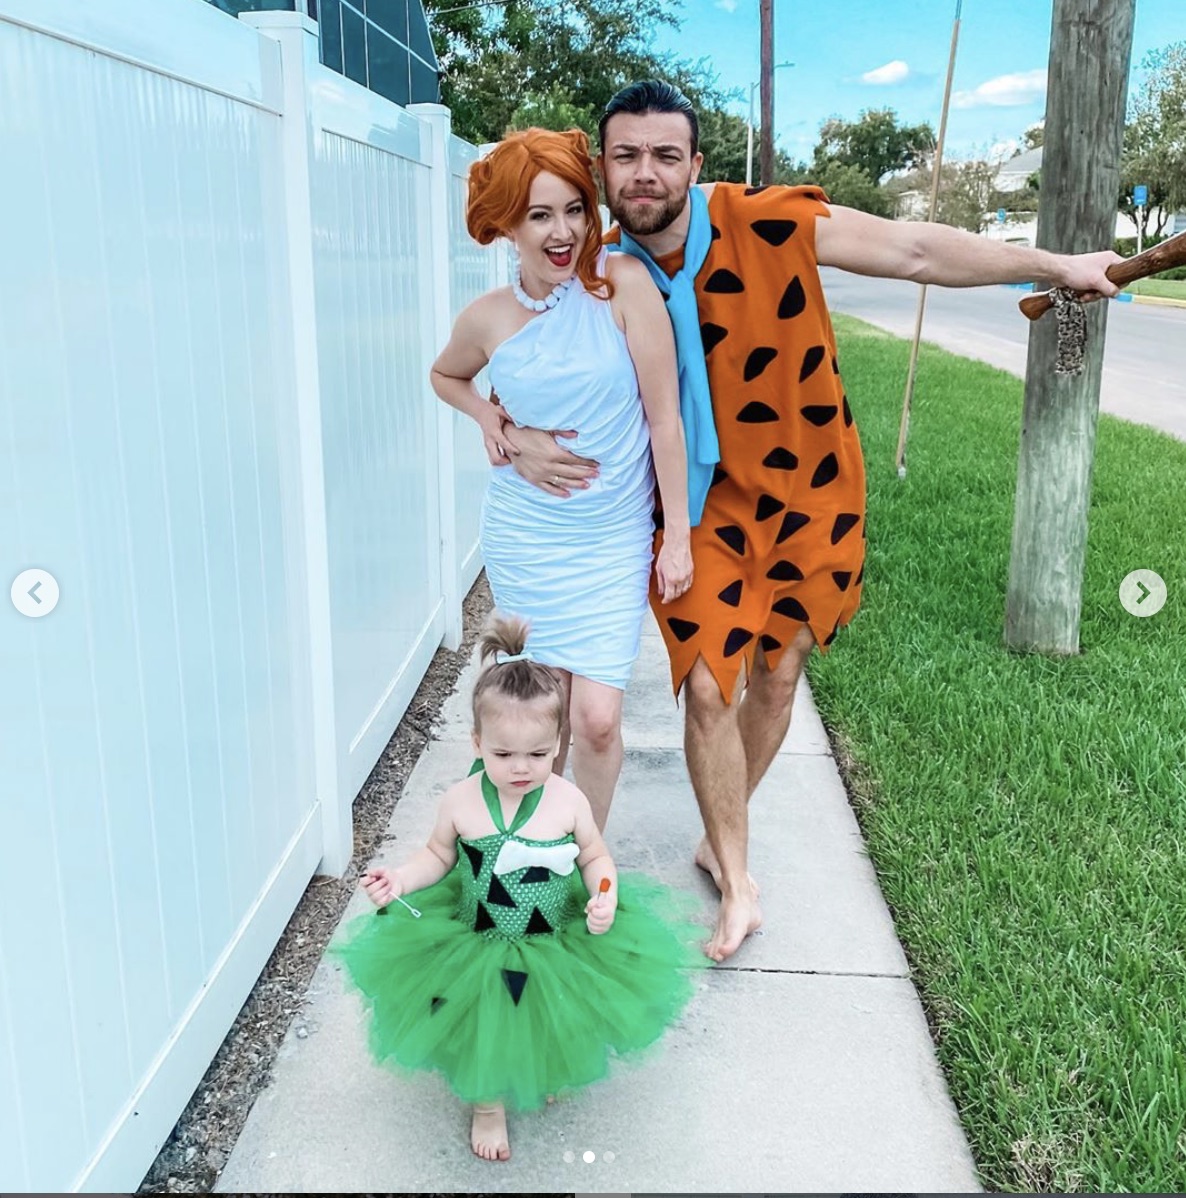 90 Day Fiance Couple Andrei And Elizabeth Might Just Have Won Halloween